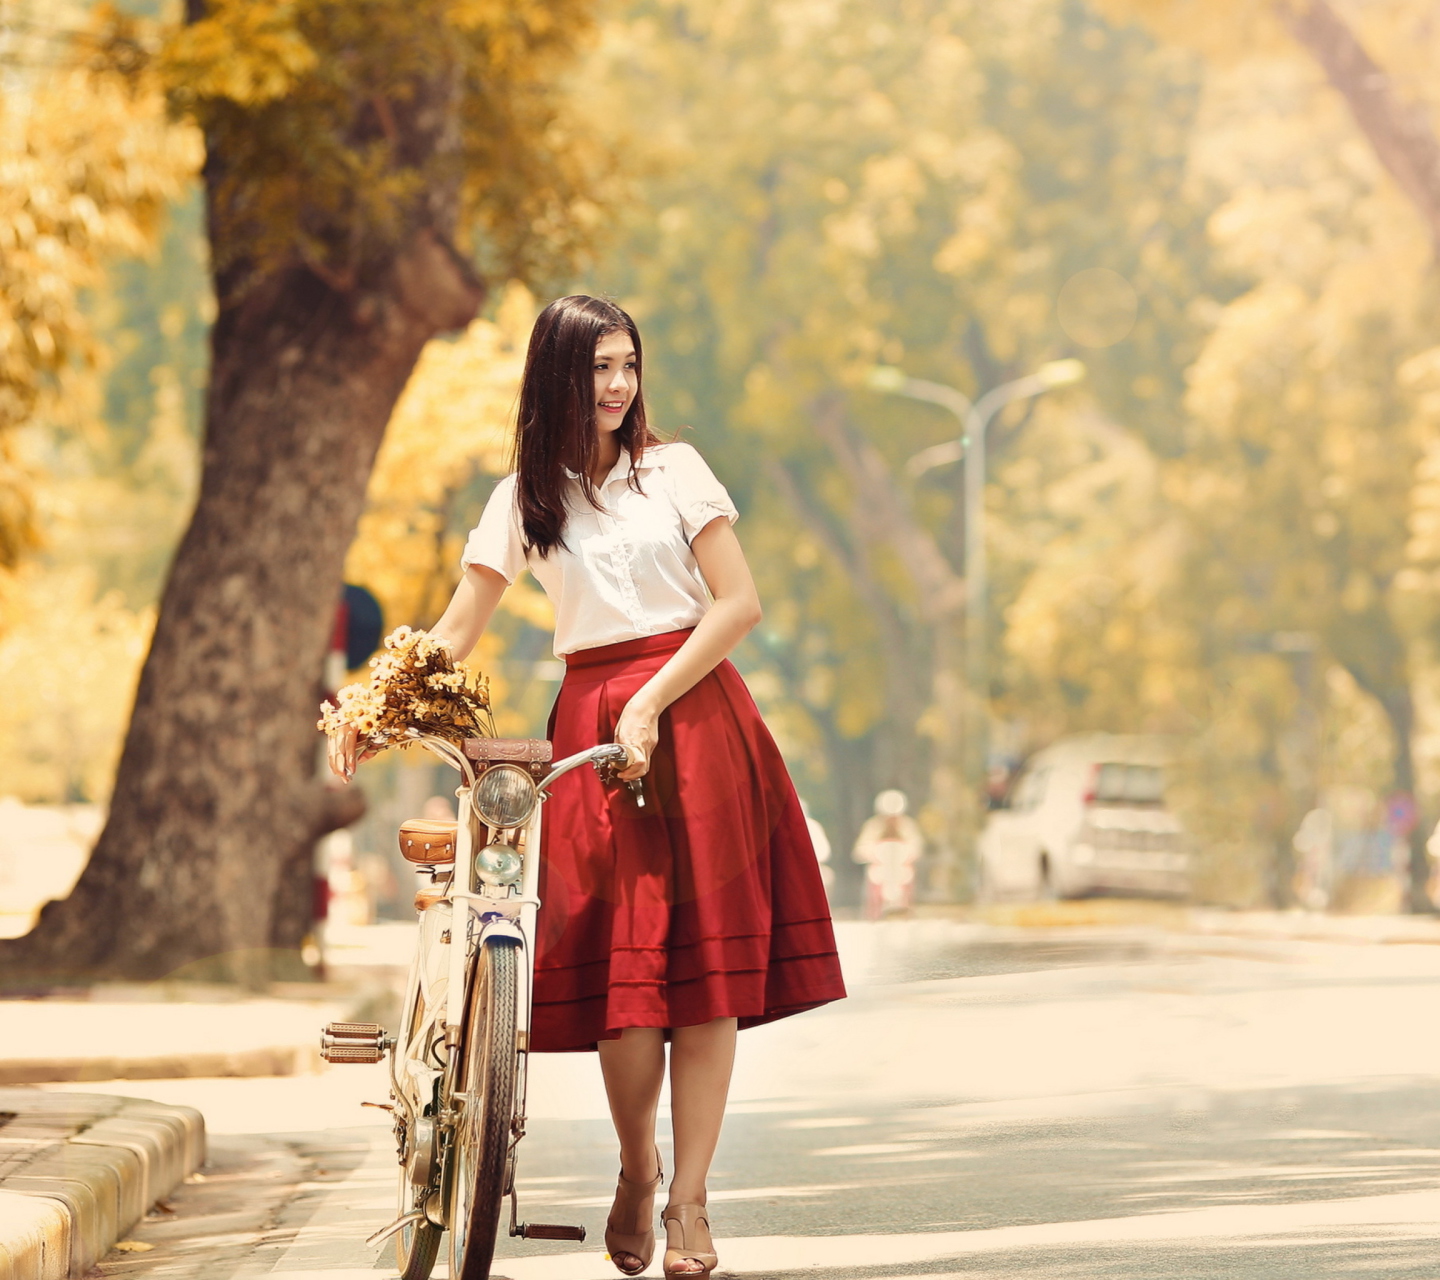 Romantic Girl With Bicycle And Flowers wallpaper 1440x1280